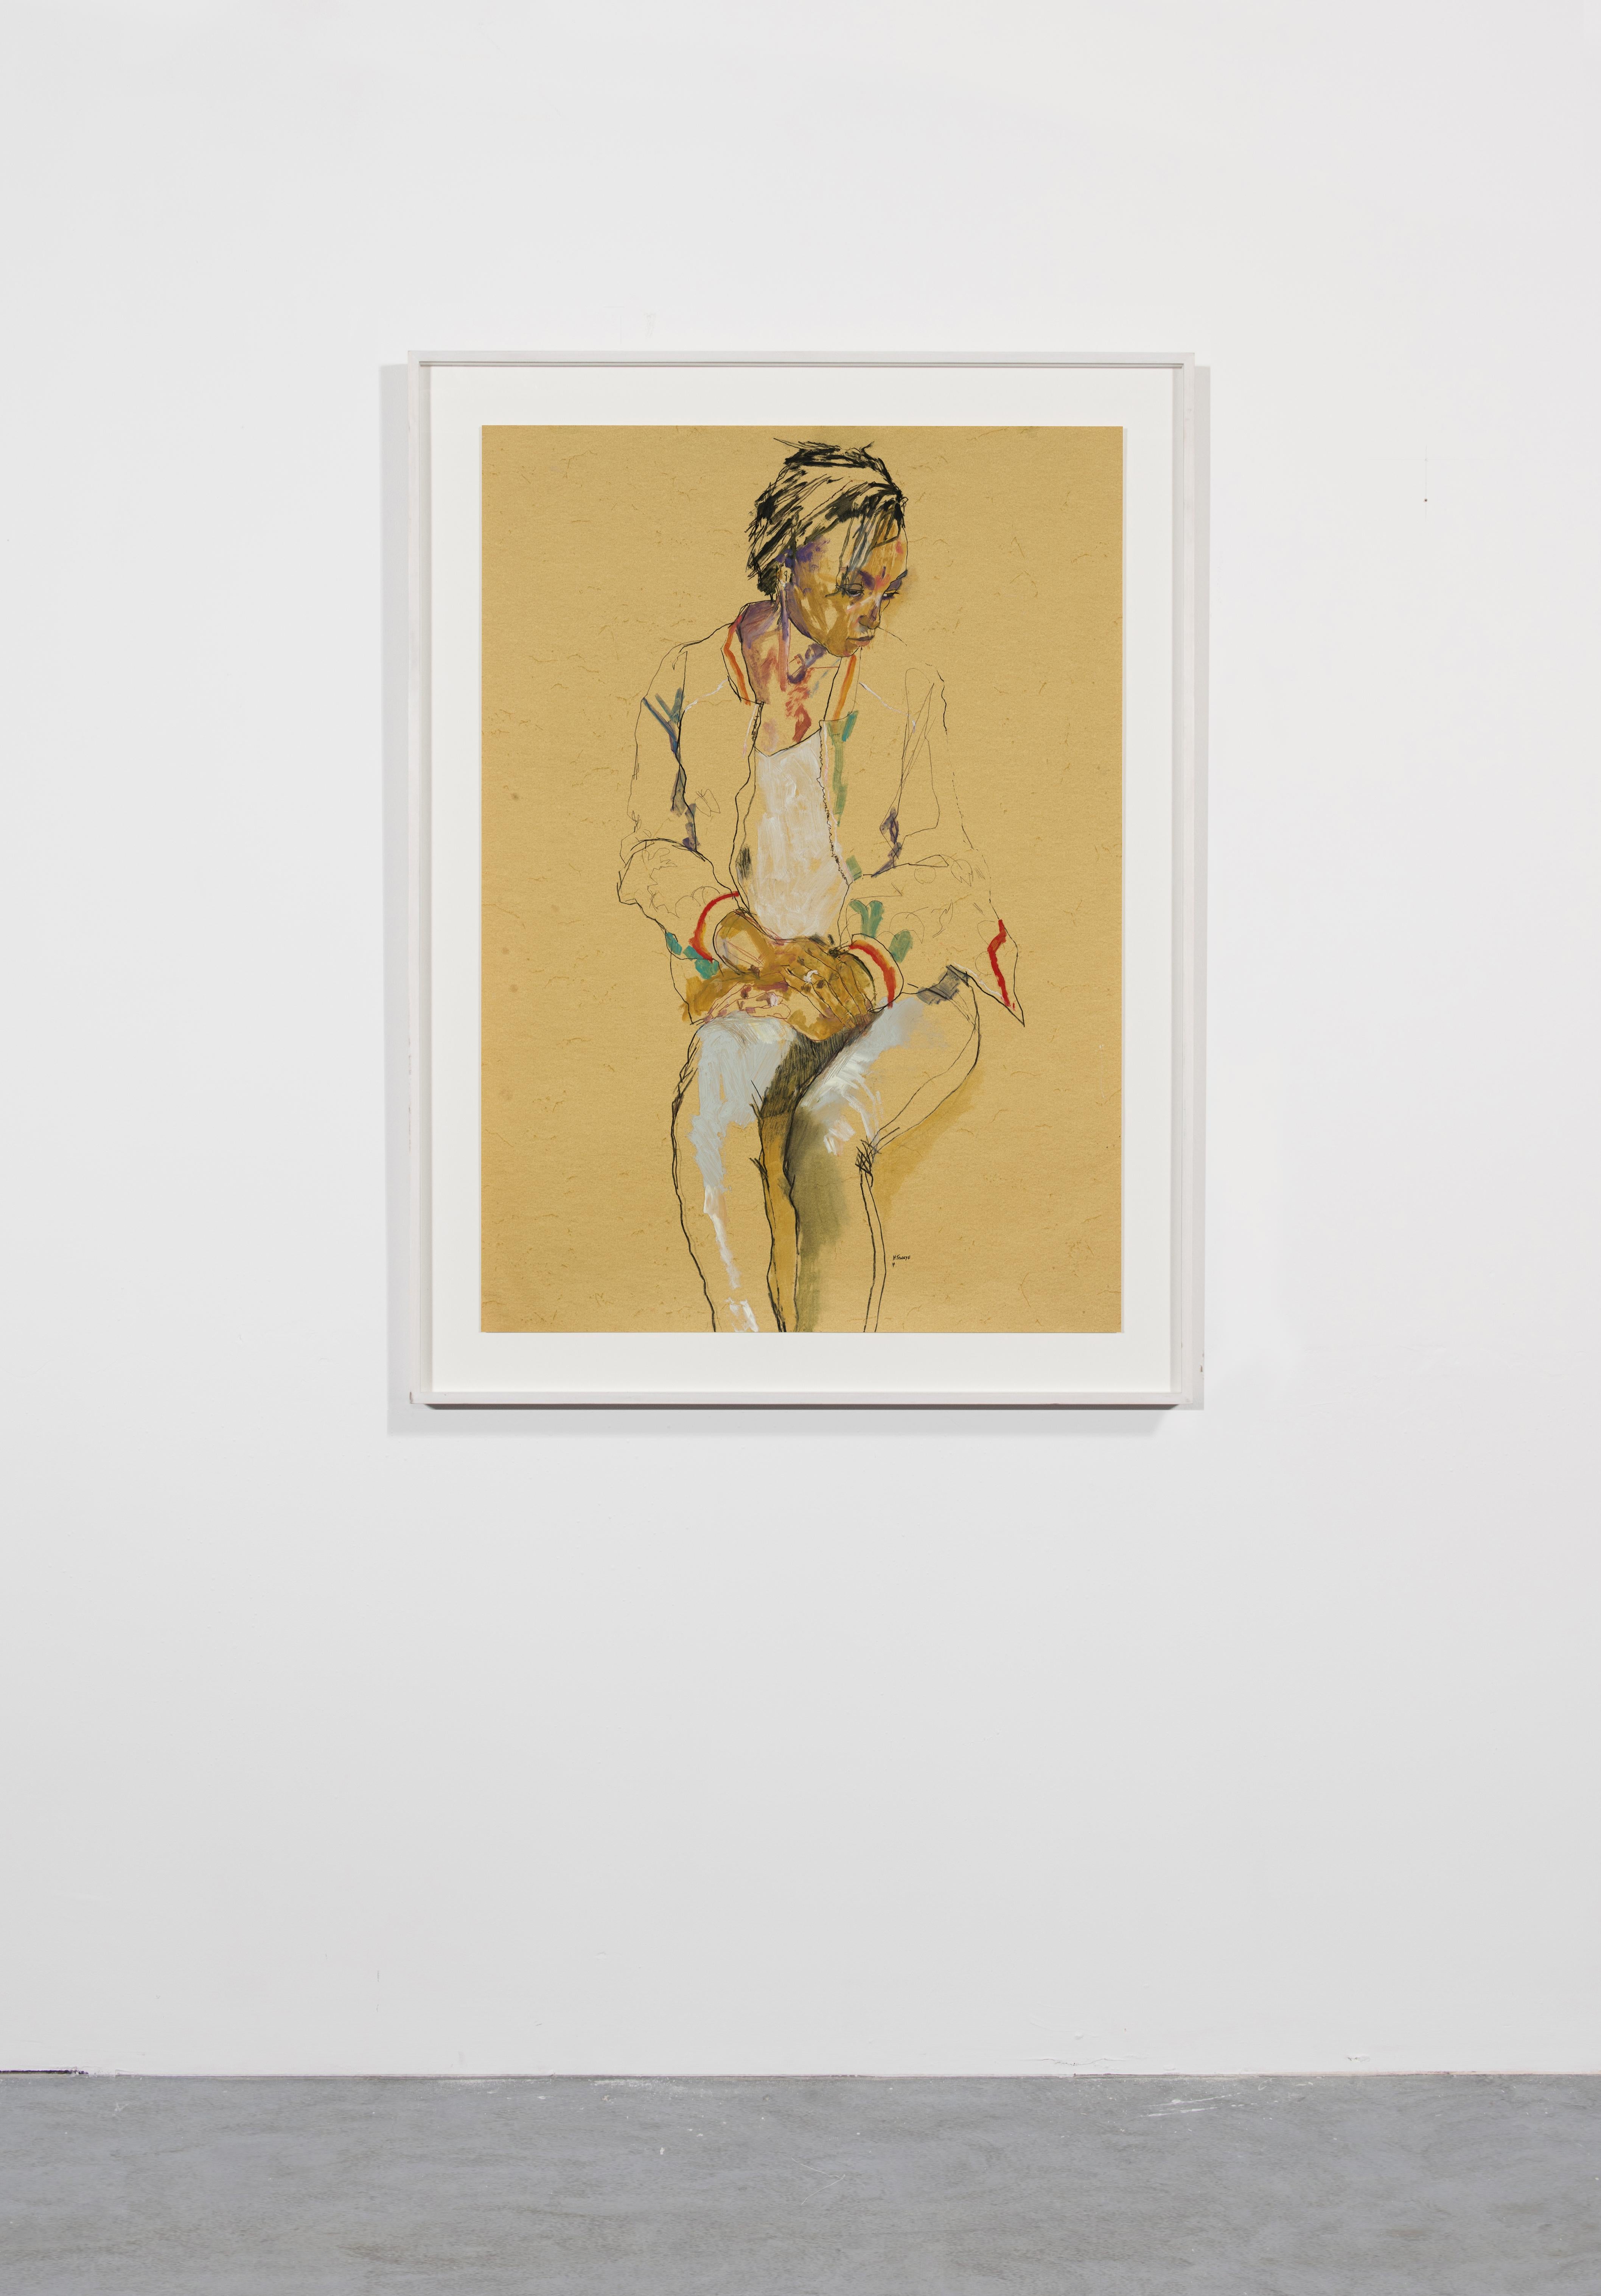 Anji (Seated, Hands in Lap, Looking Away), Mixed media on ochre paper - Contemporary Art by Howard Tangye